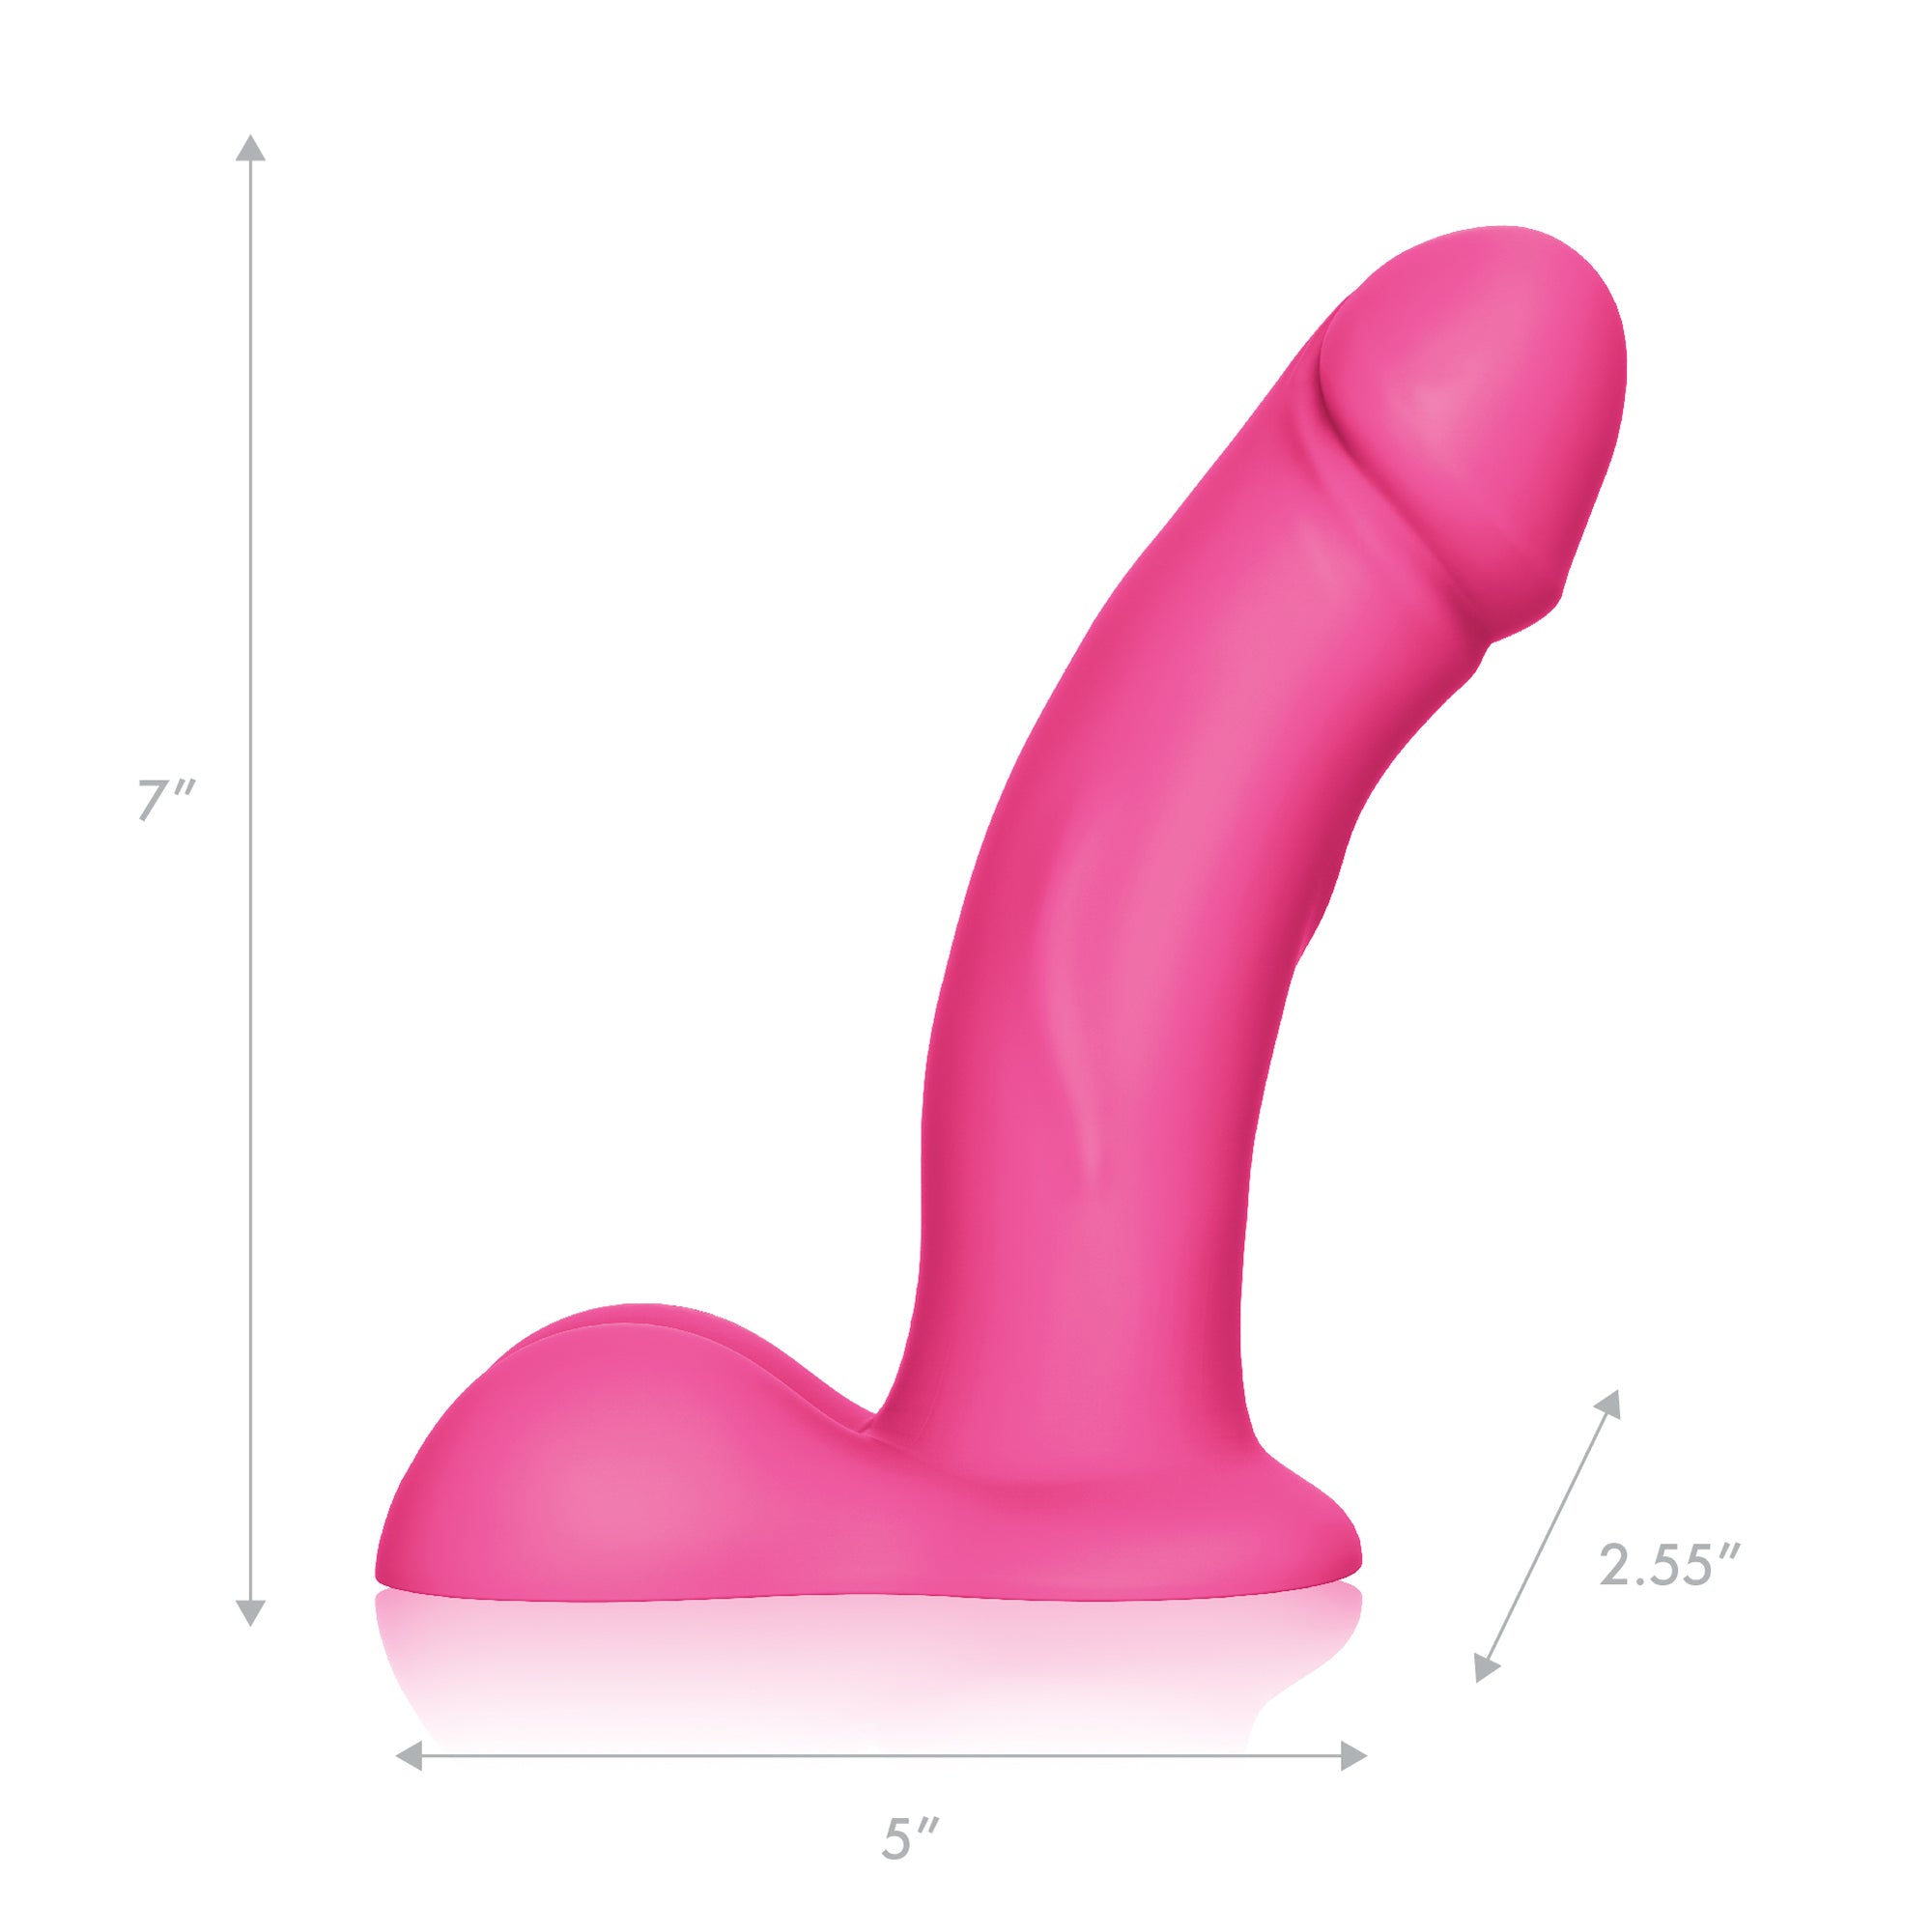 6.5” Realistic SIlicone Dildo With Balls and Harness Included